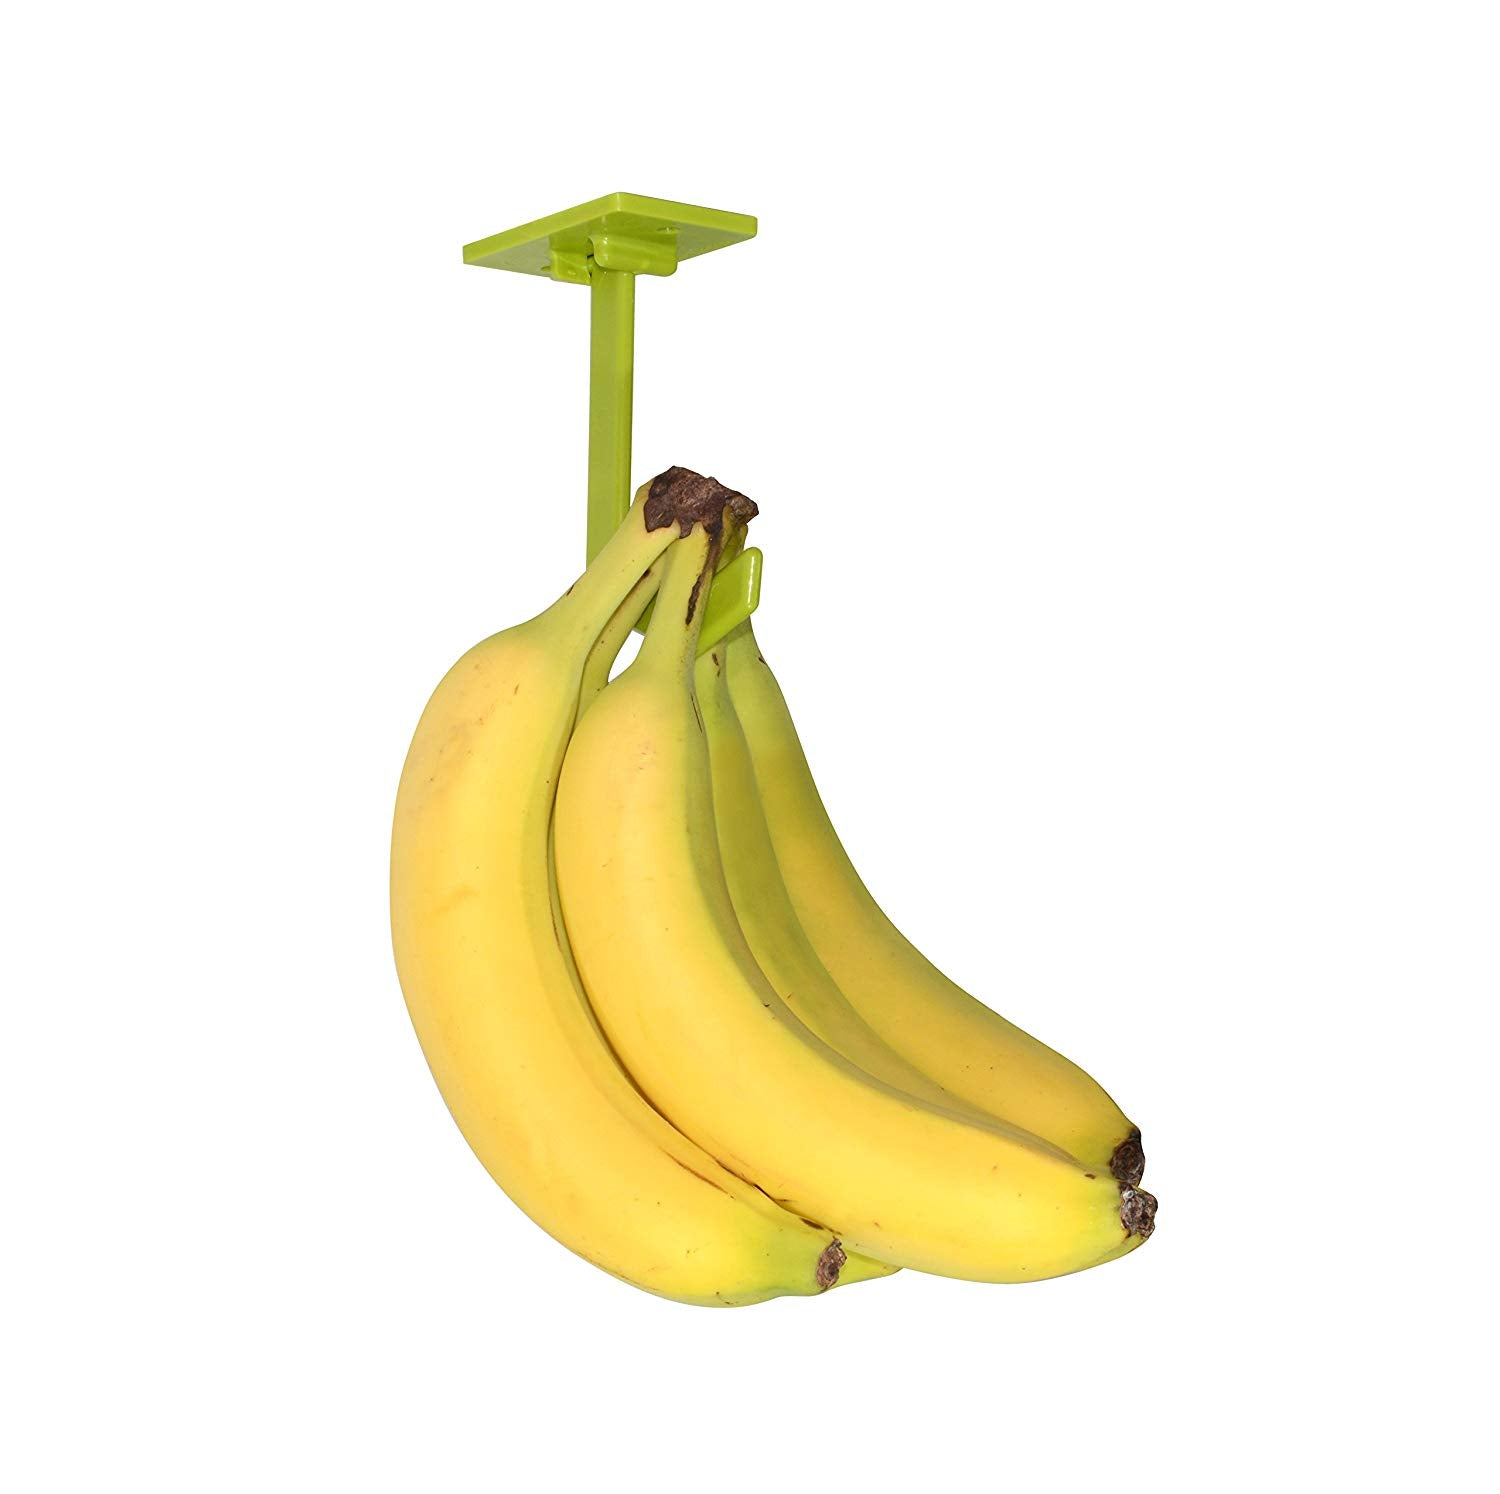 Banana Hanger – Under Cabinet Hook for Bananas or Lightweight Kitchen Items. Hook Folds-up When Not in Use. Self-adhesive and Pre-drilled Holes (Screws Provided) Keep Bananas Fresh.(Avocado Green)